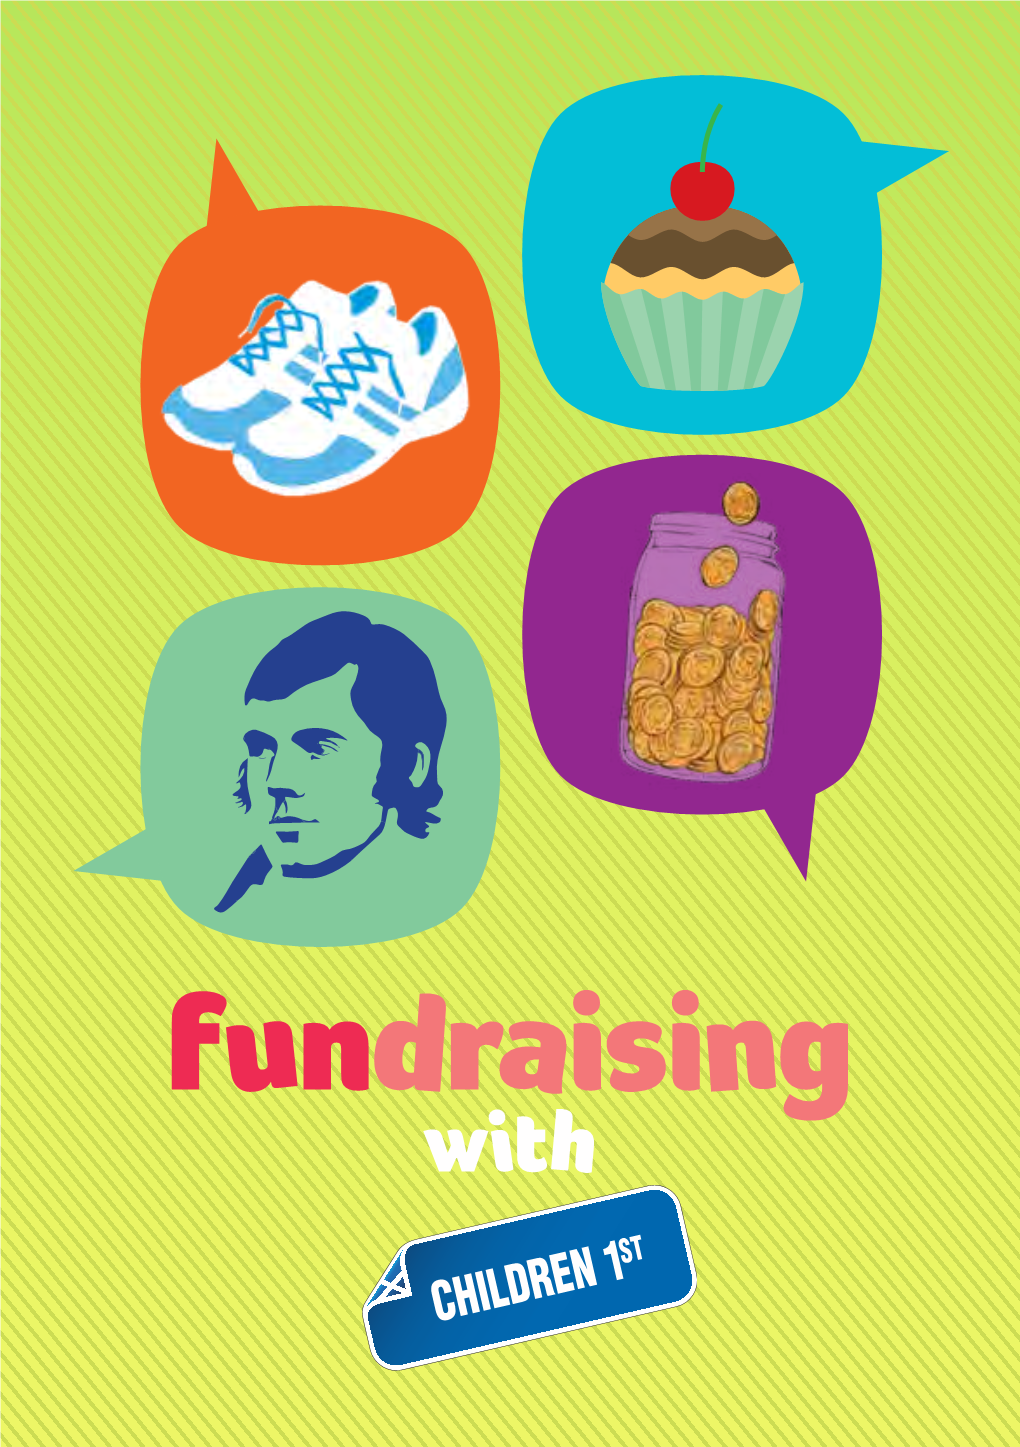 Fundraising with CHILDREN